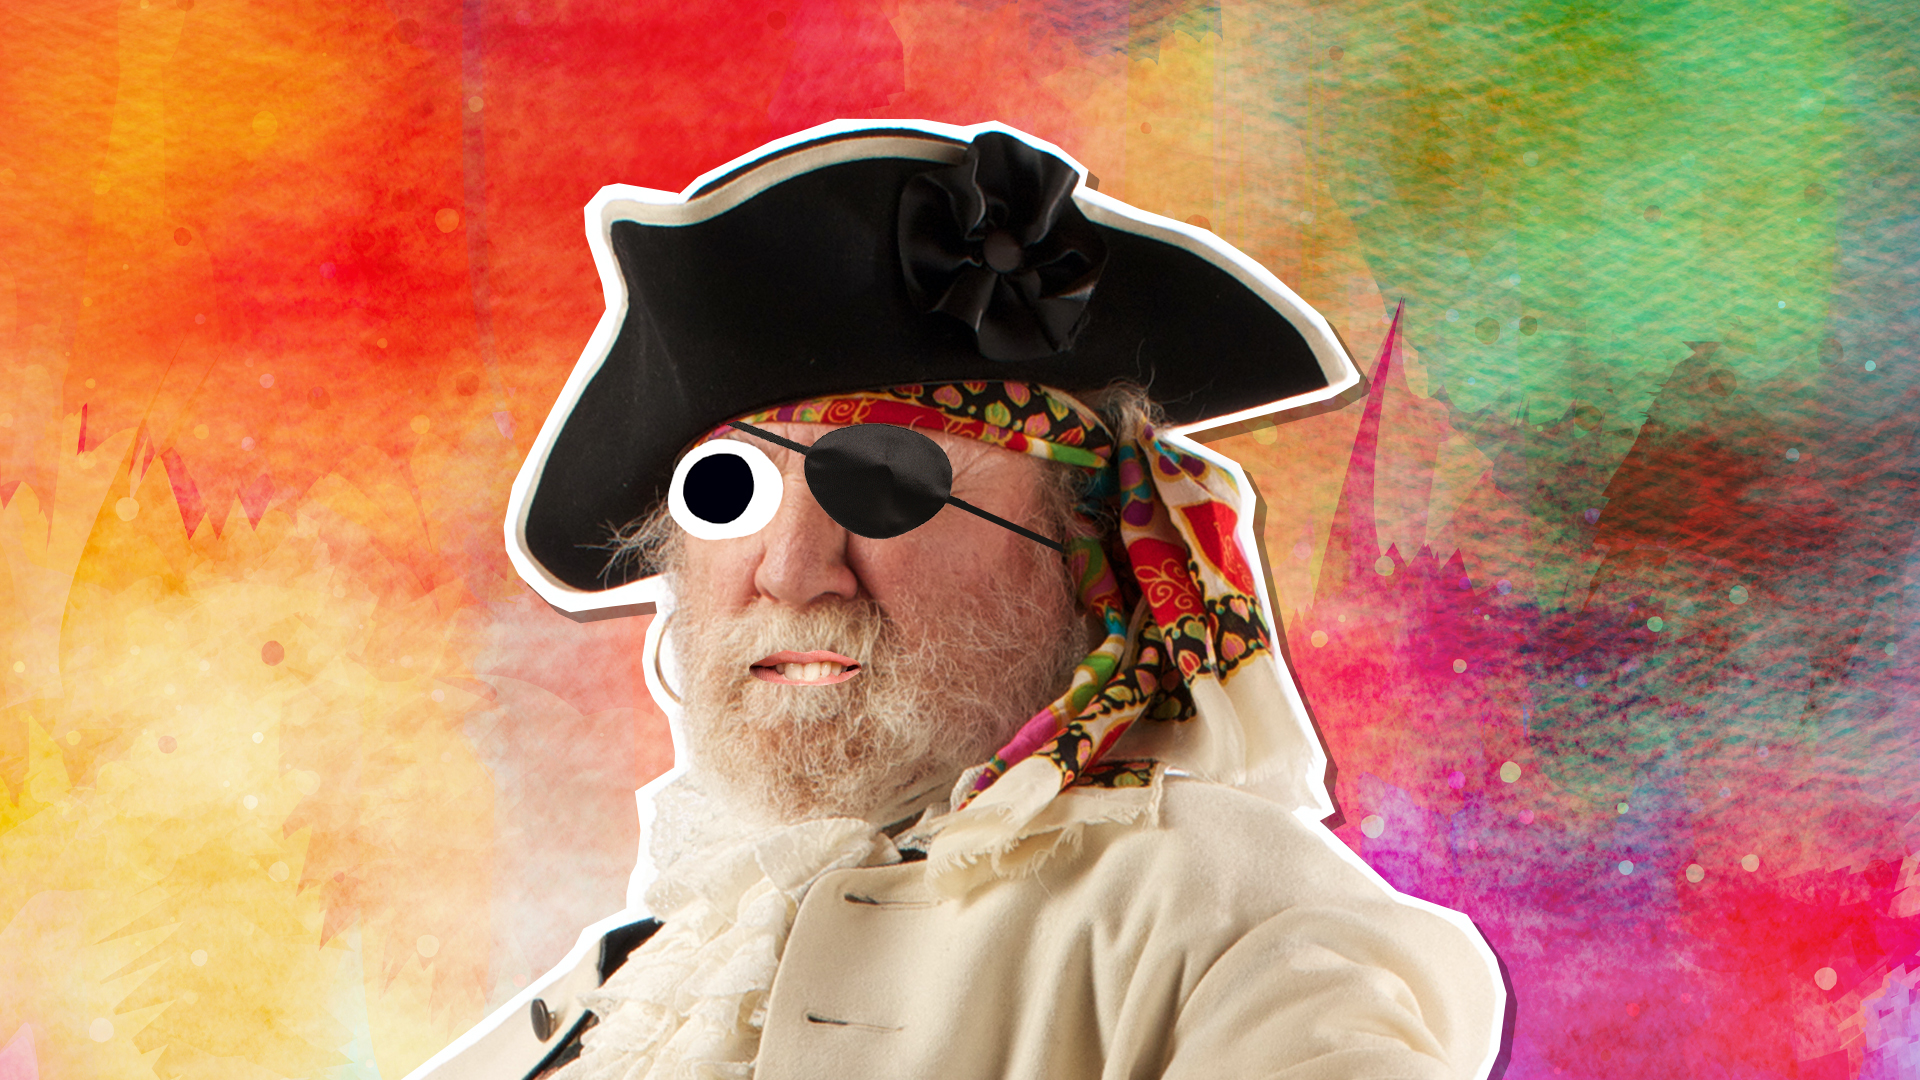 A pirate on a colourful background